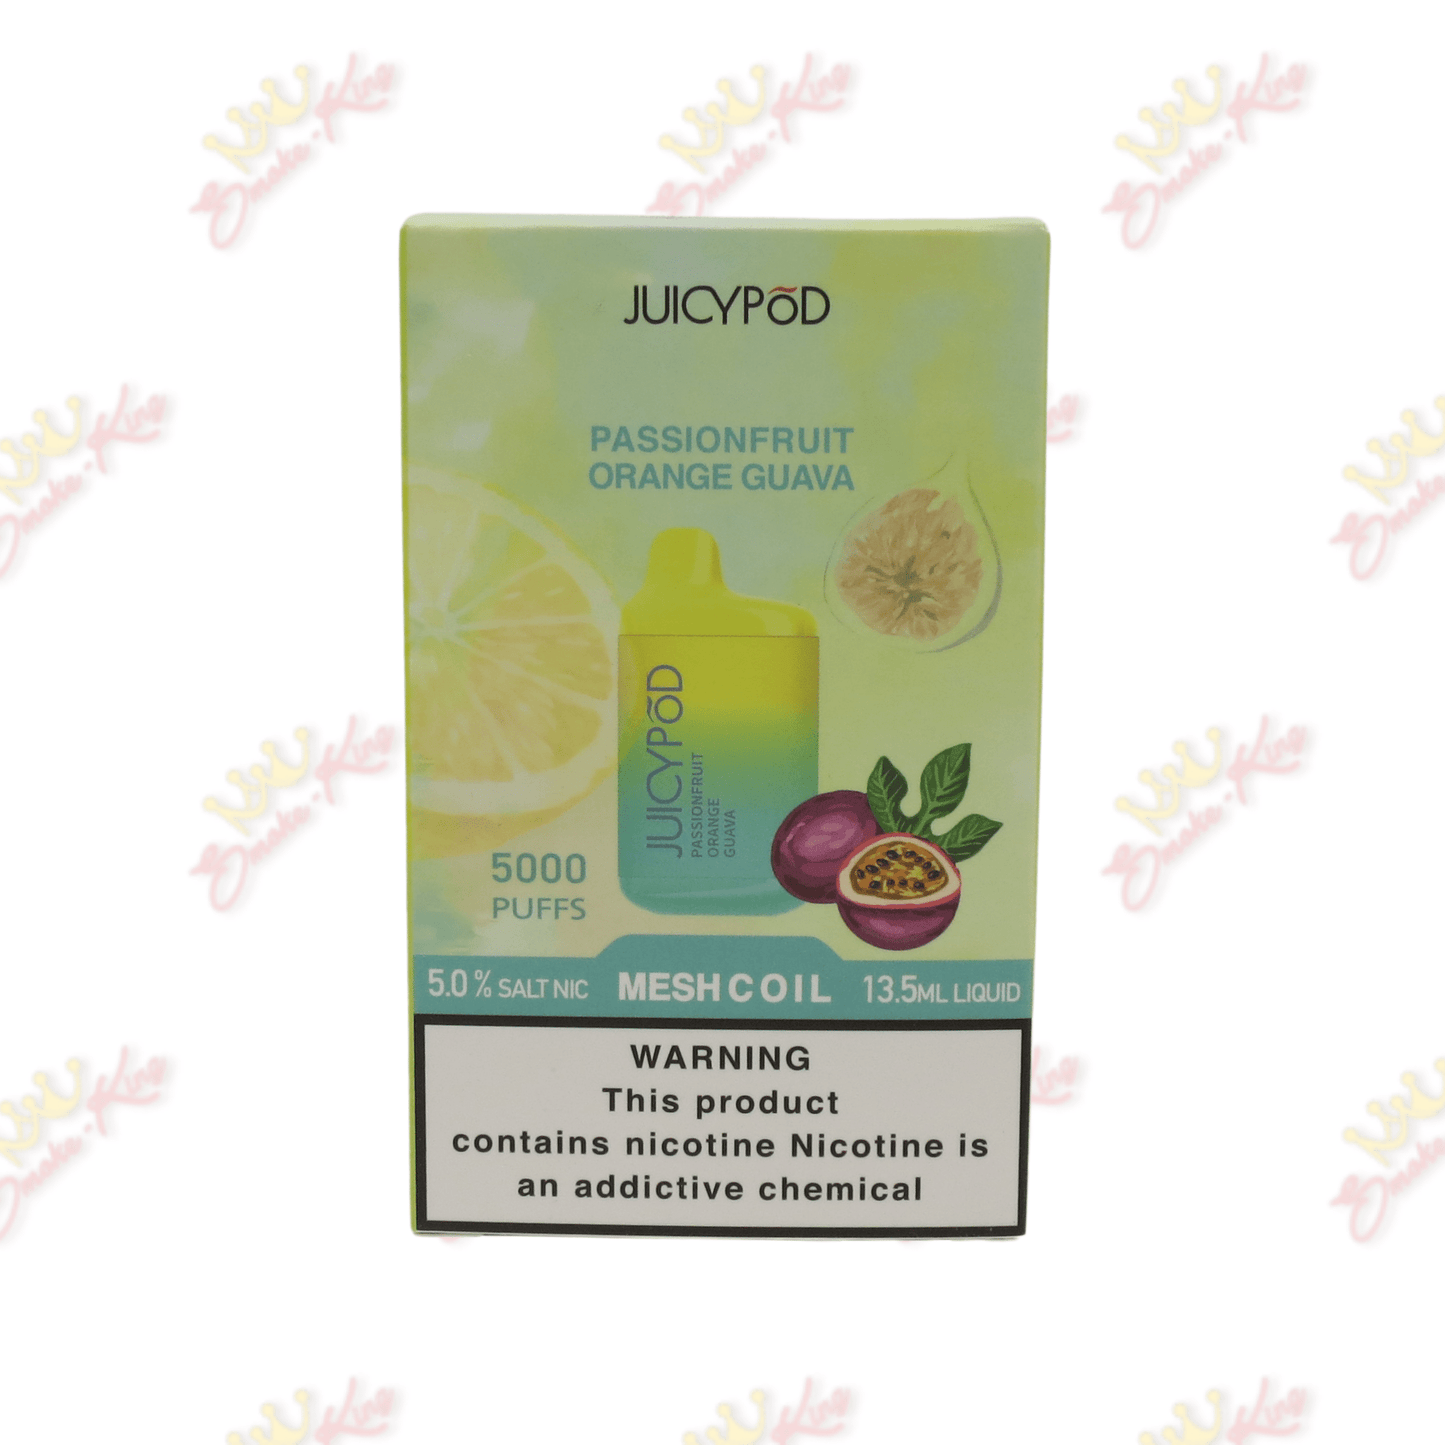 Juicy Pods Disposable Vapes Passionfruit Orange Guava / One for $19.99 Juicy Pod (5000 Puffs)